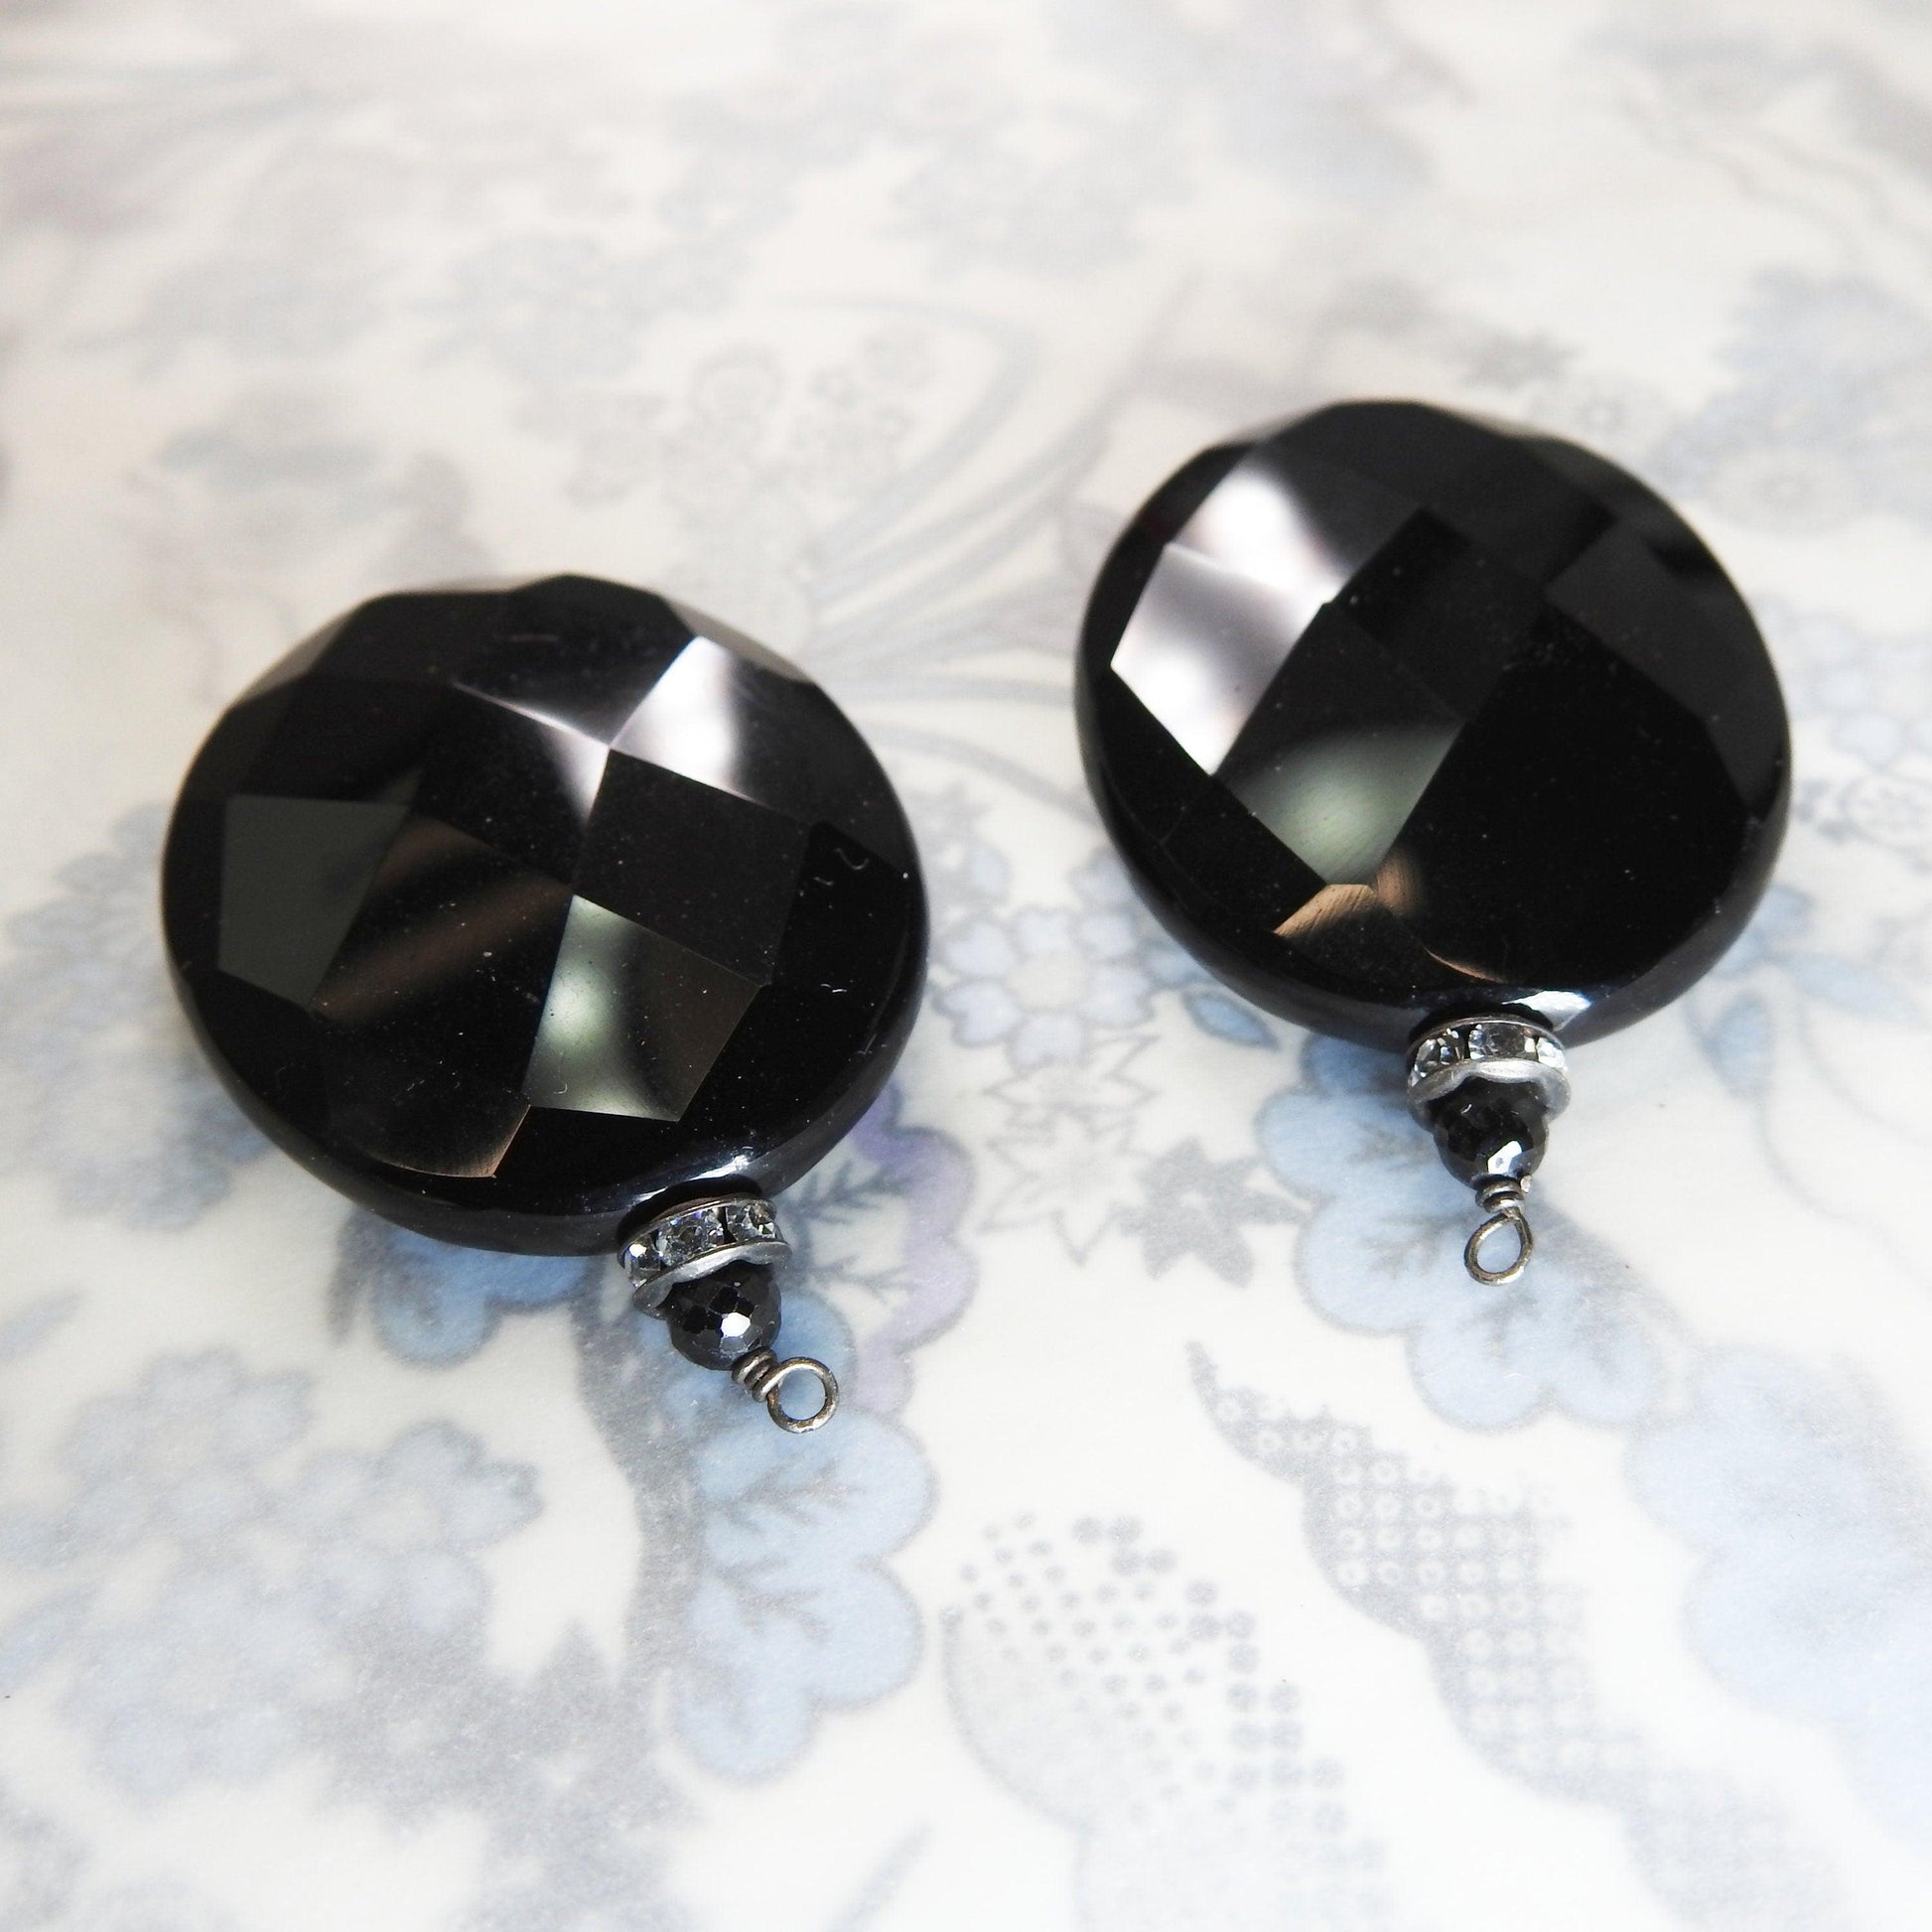 Faceted glass pendants components for making earrings. Jet black chandelier or vintage pendulous oval shaped focal teardrop adornment